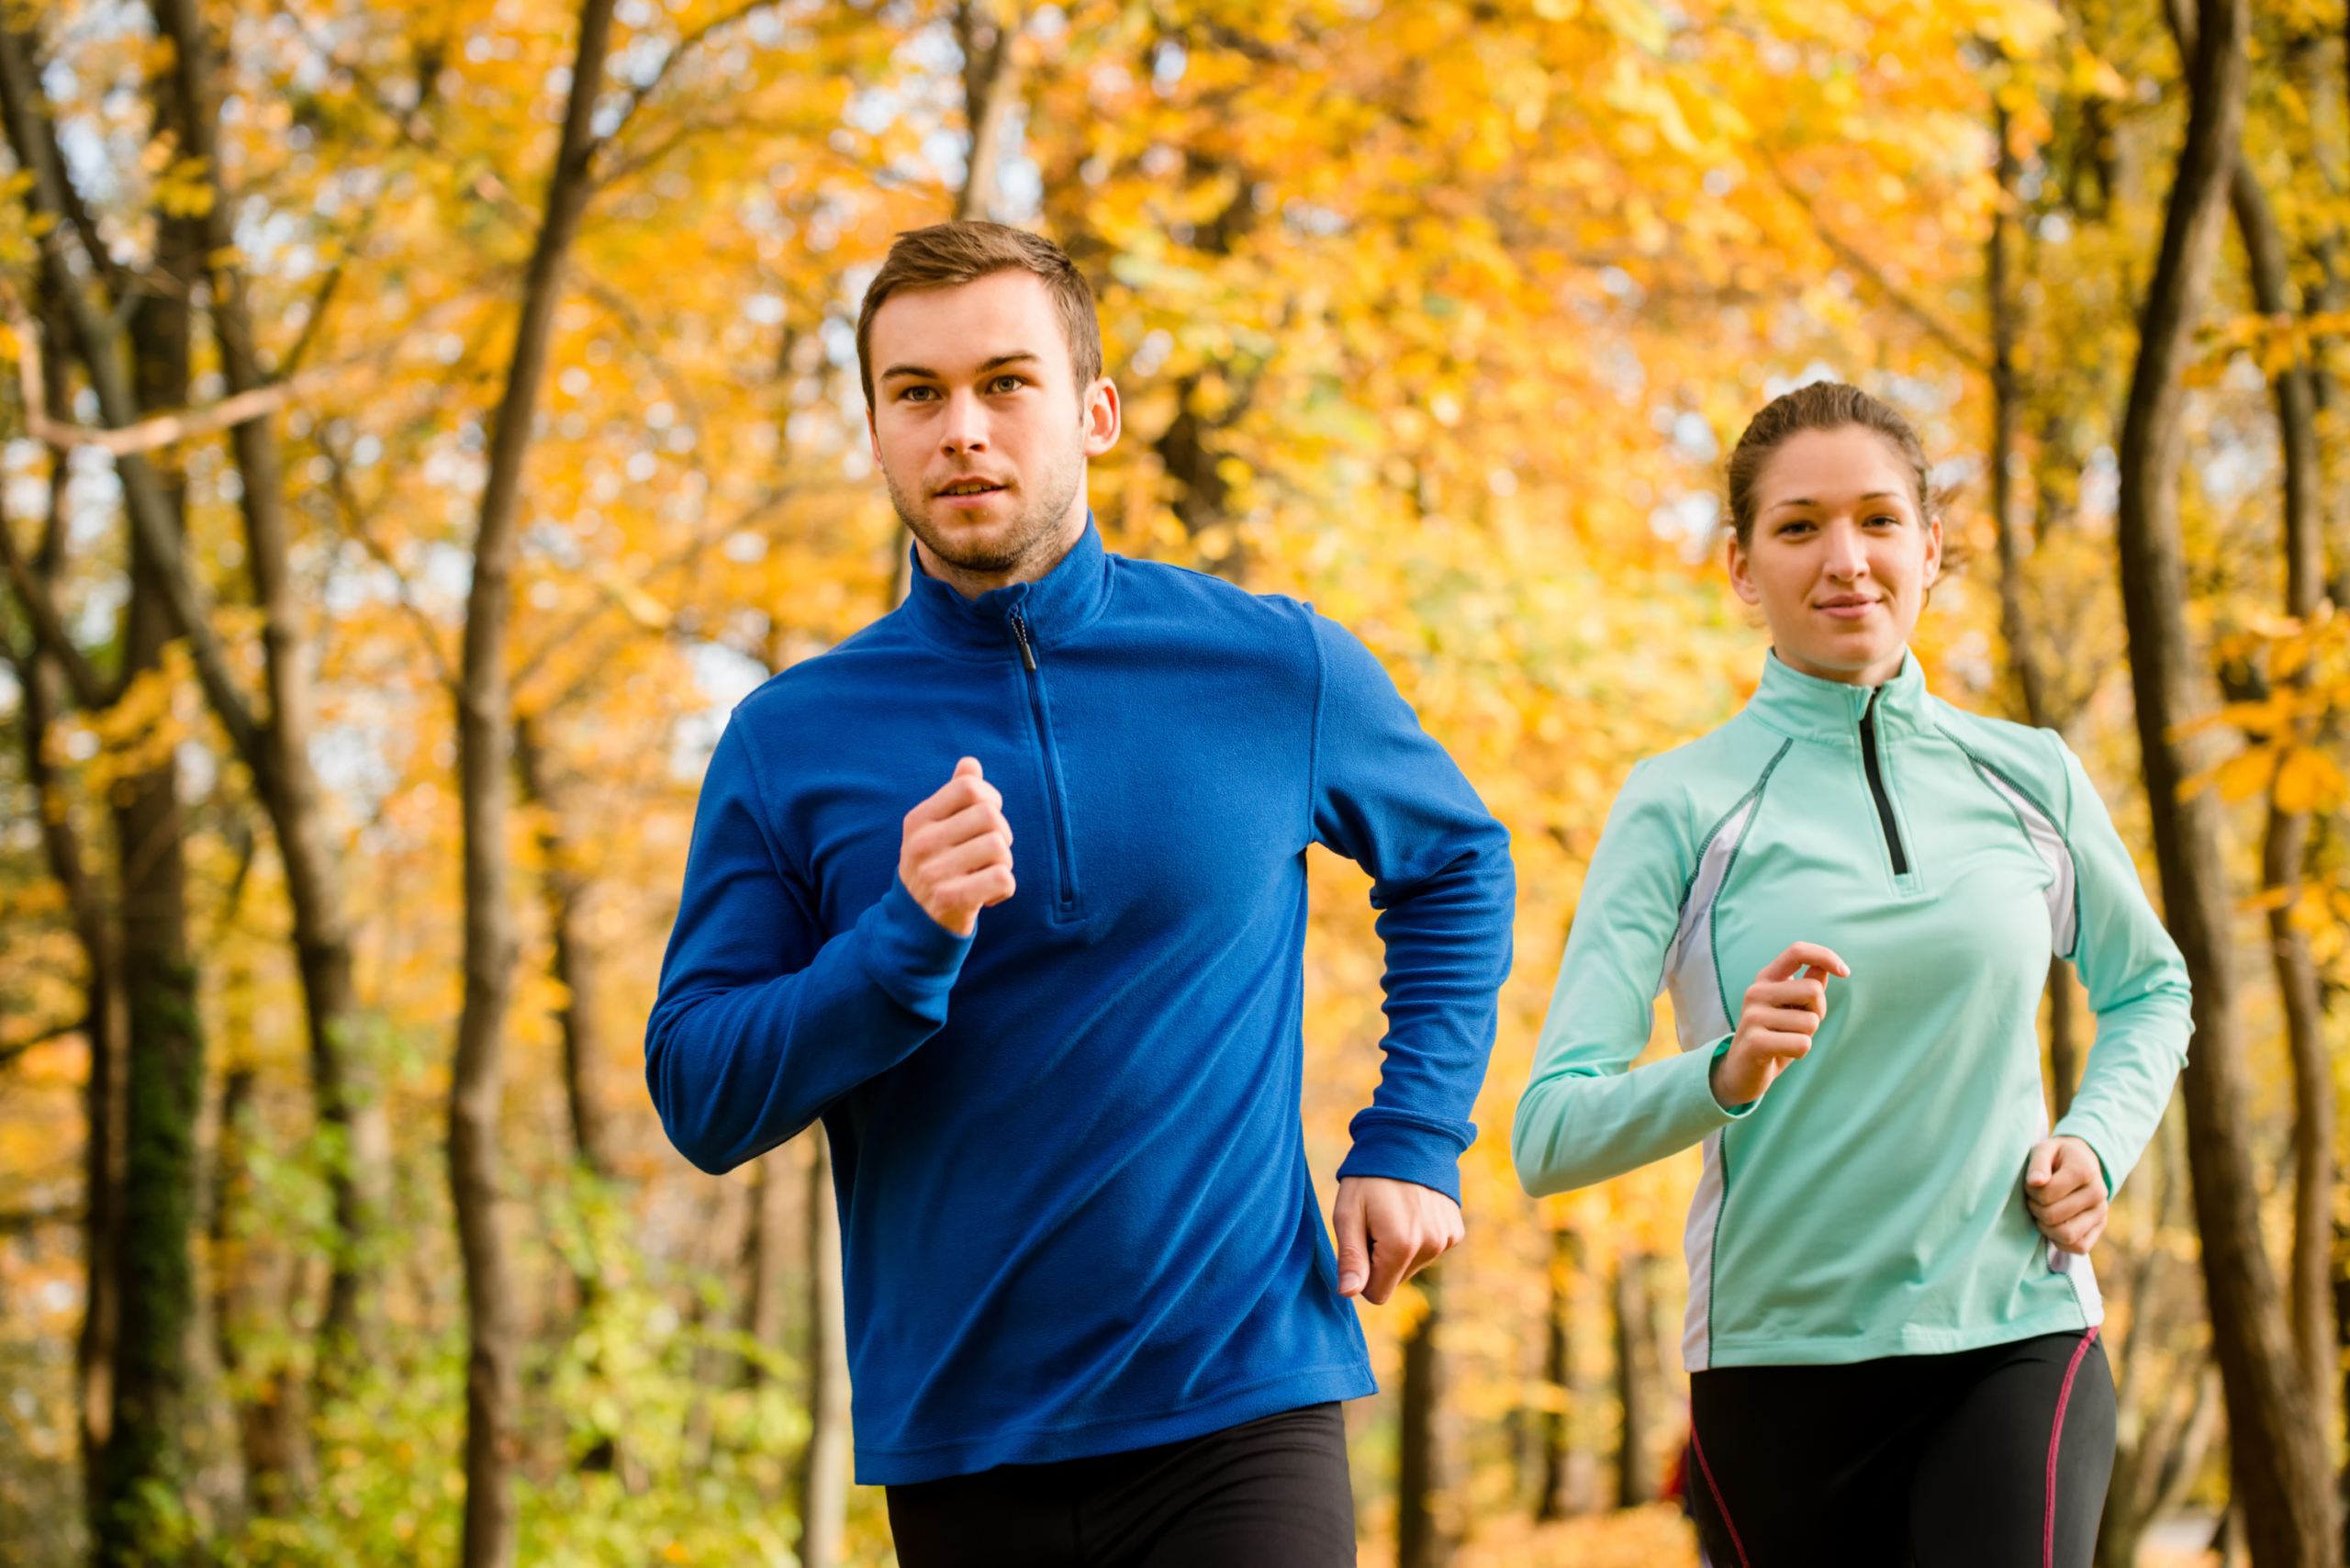 man and woman jogging in yellow foliage forest